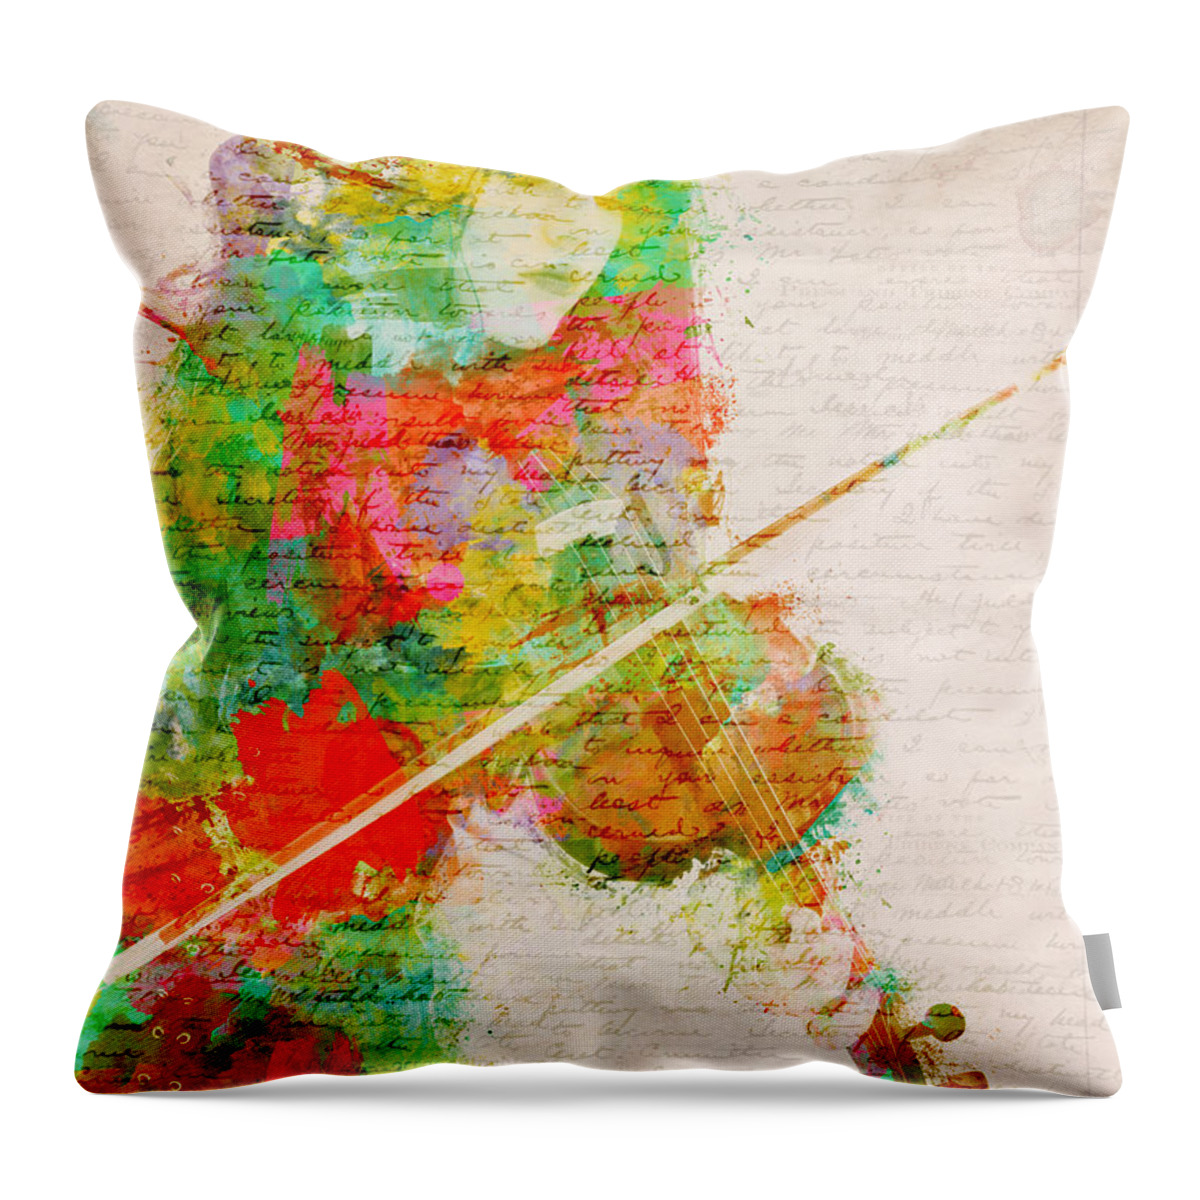 Violin Throw Pillow featuring the digital art Music In My Soul by Nikki Smith